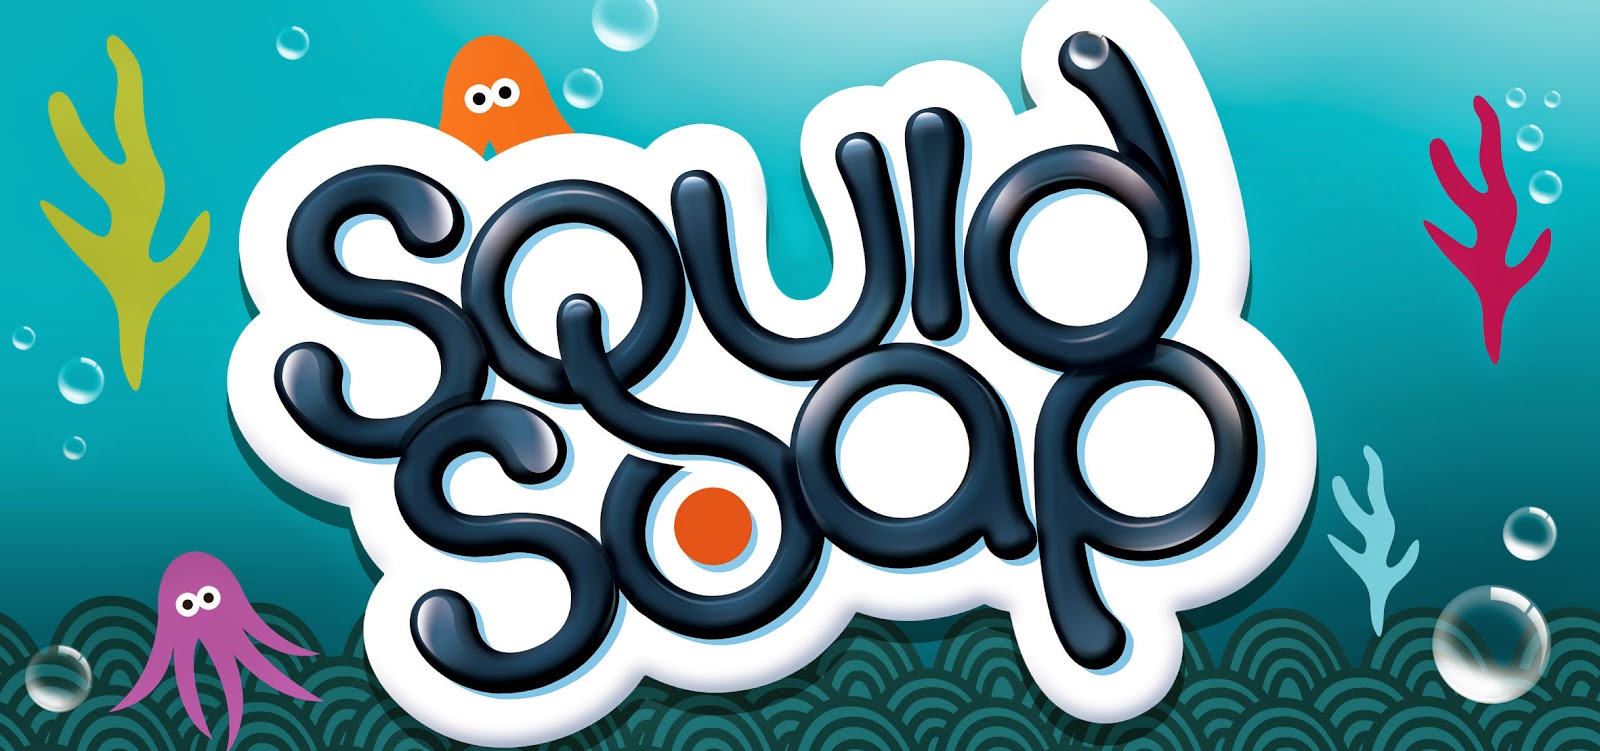 Squid Soap - A unique Hand washing Experience for Children